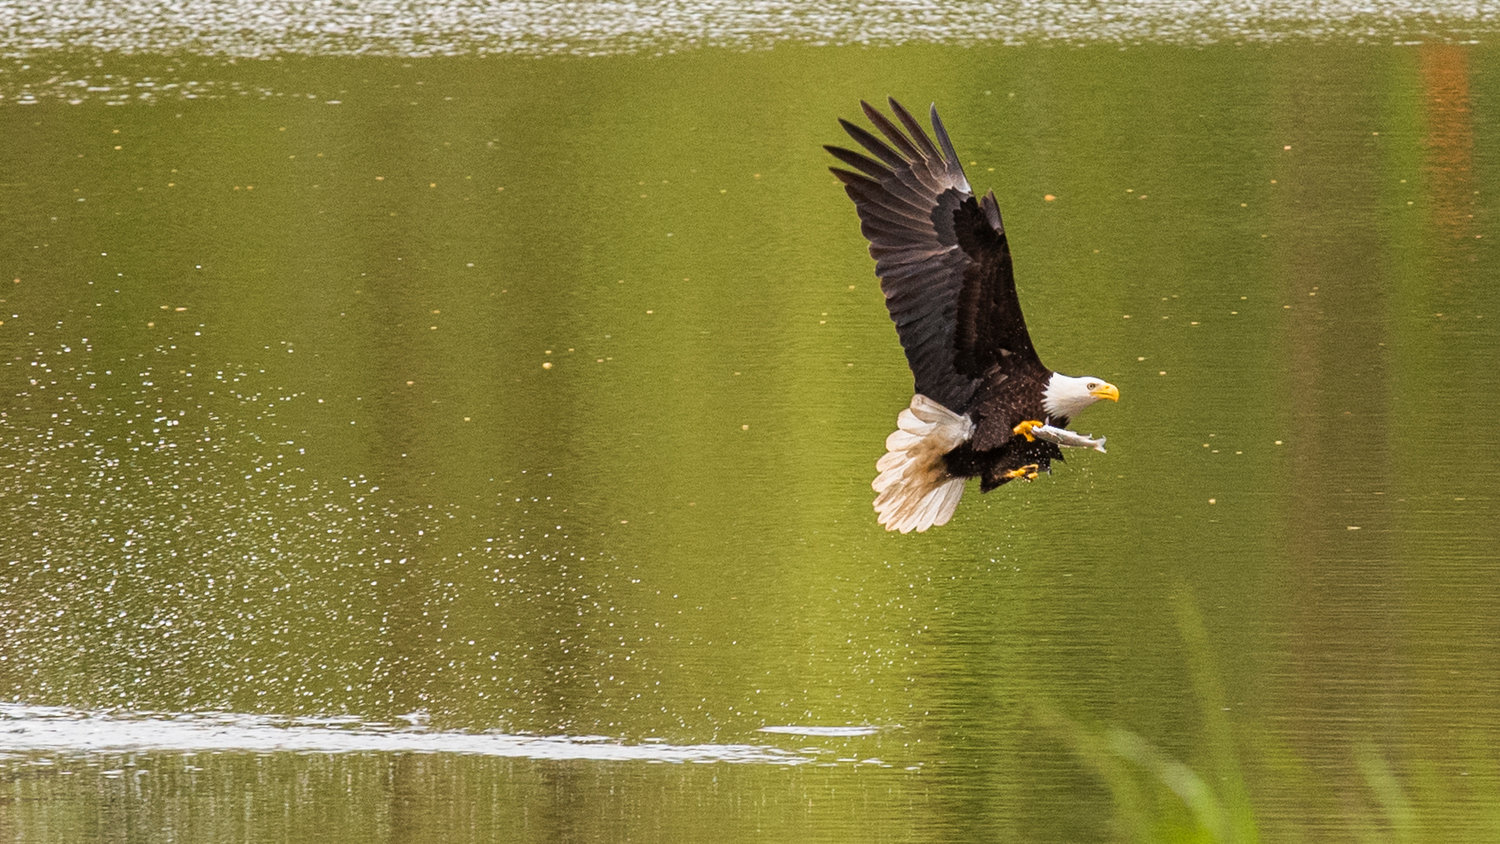 A bald eagle swoops down onto Fort Borst Lake in Centralia Wednesday afternoon to snatch a fish.